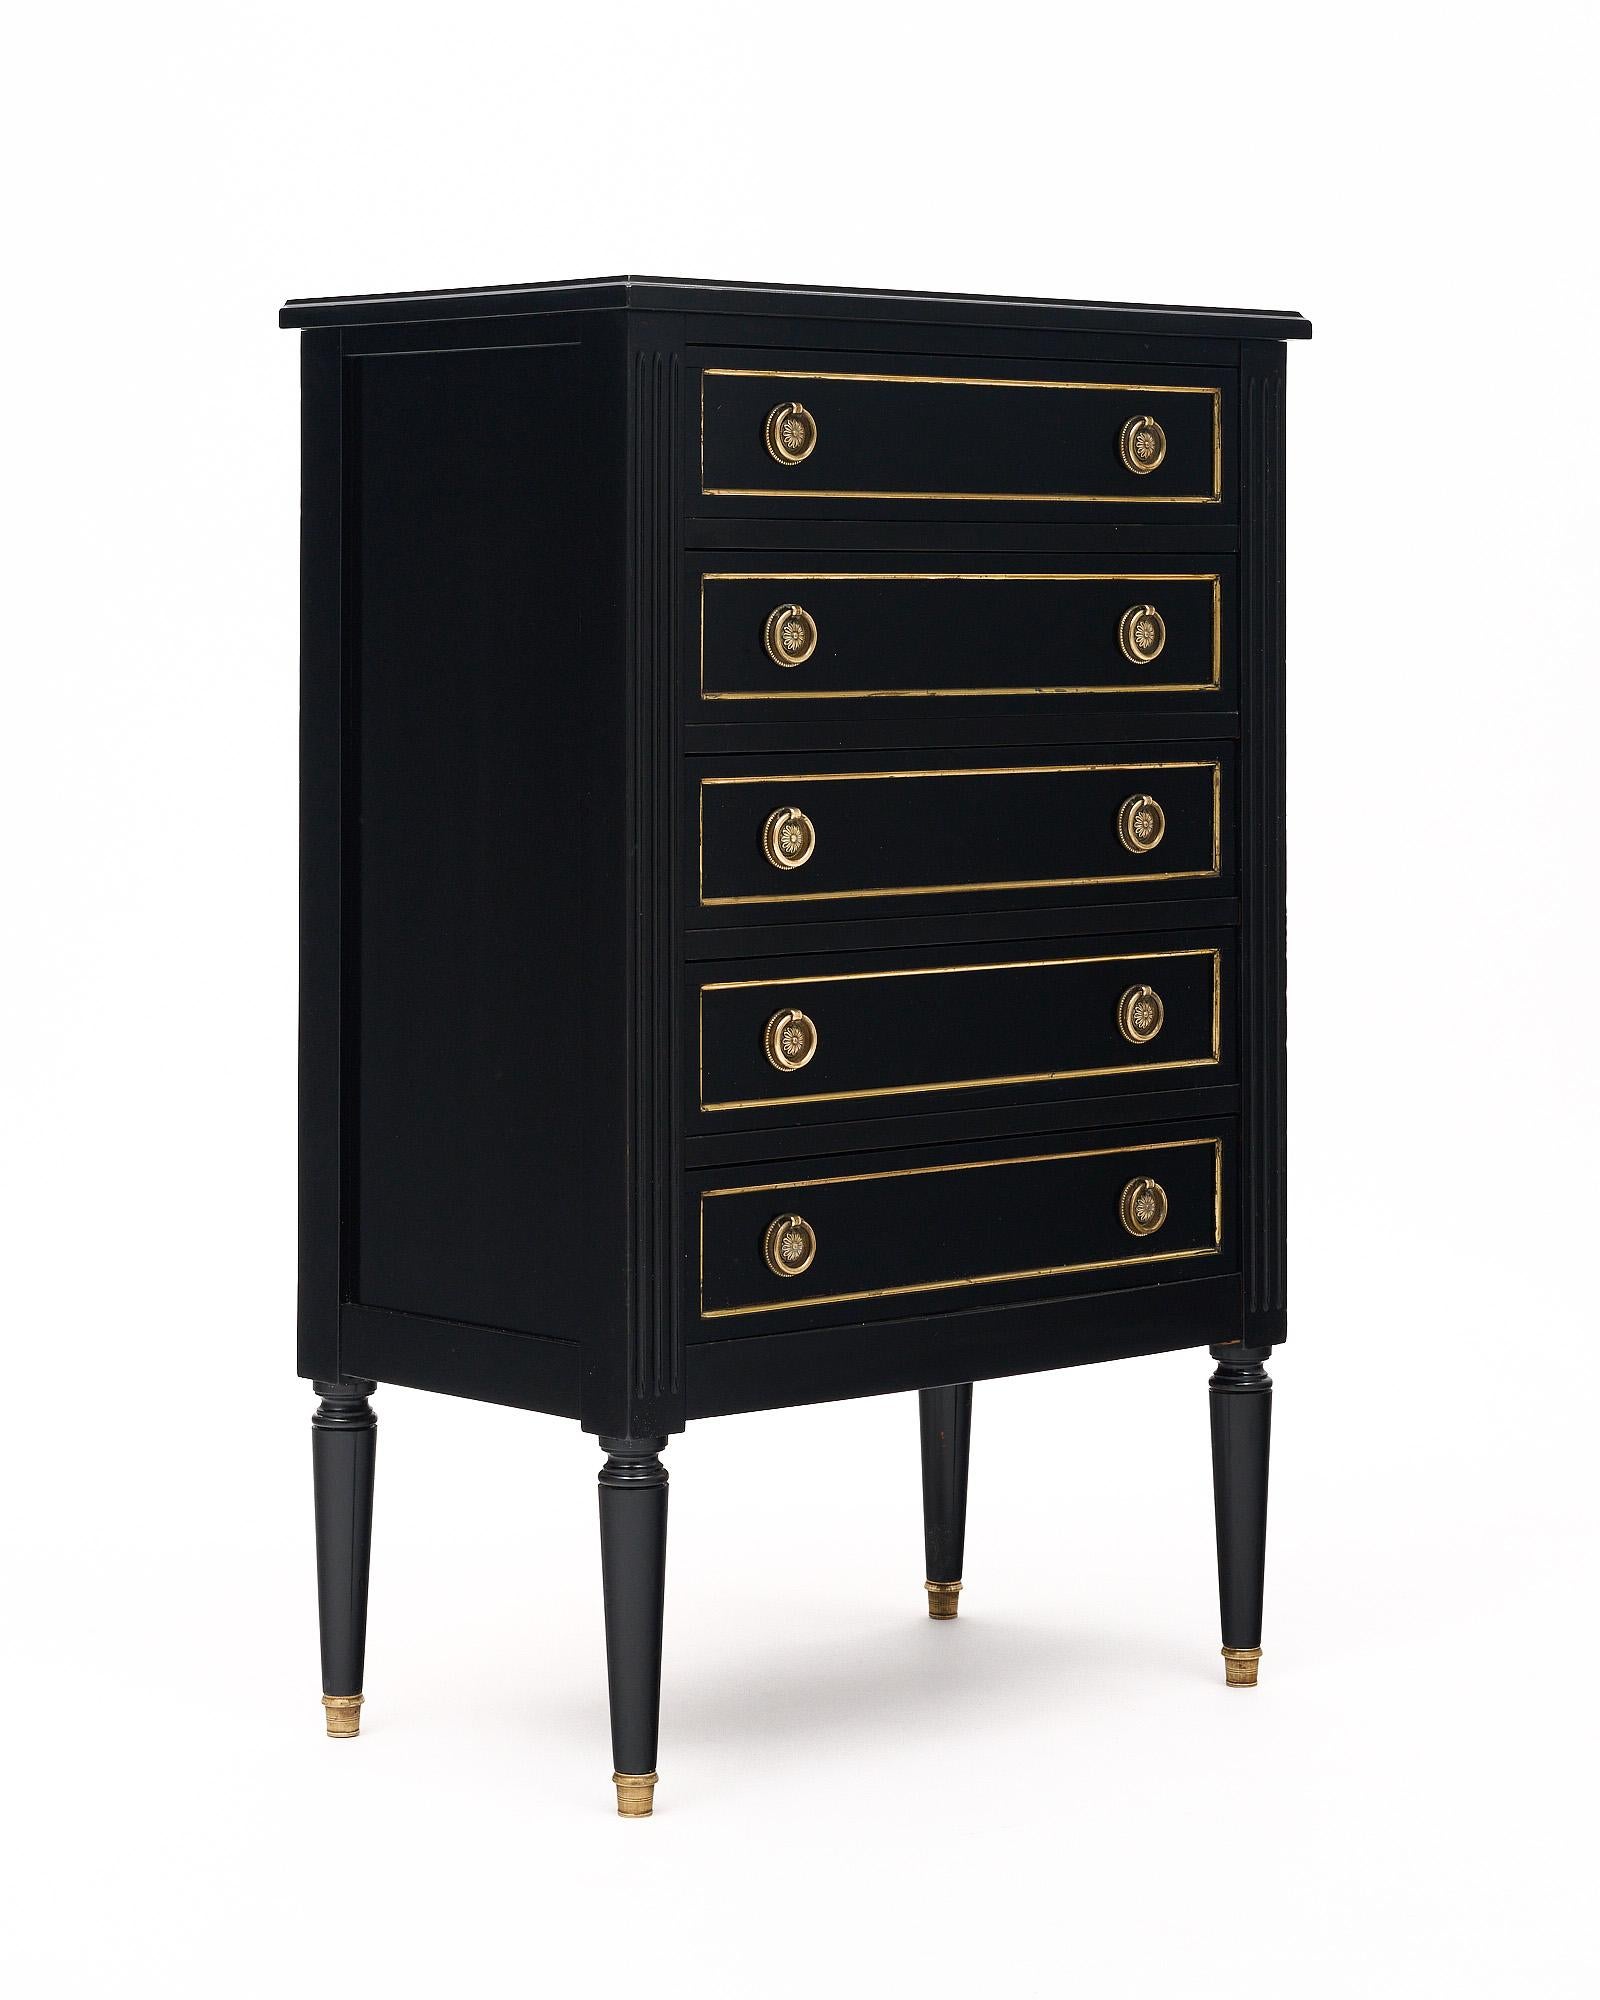 Chiffonier from France featuring five dovetailed drawers and gilt brass trims throughout. This piece is made of mahogany and has been ebonized with a lustrous French polish finish. The sides are fluted and four tapered, brass capped legs support the